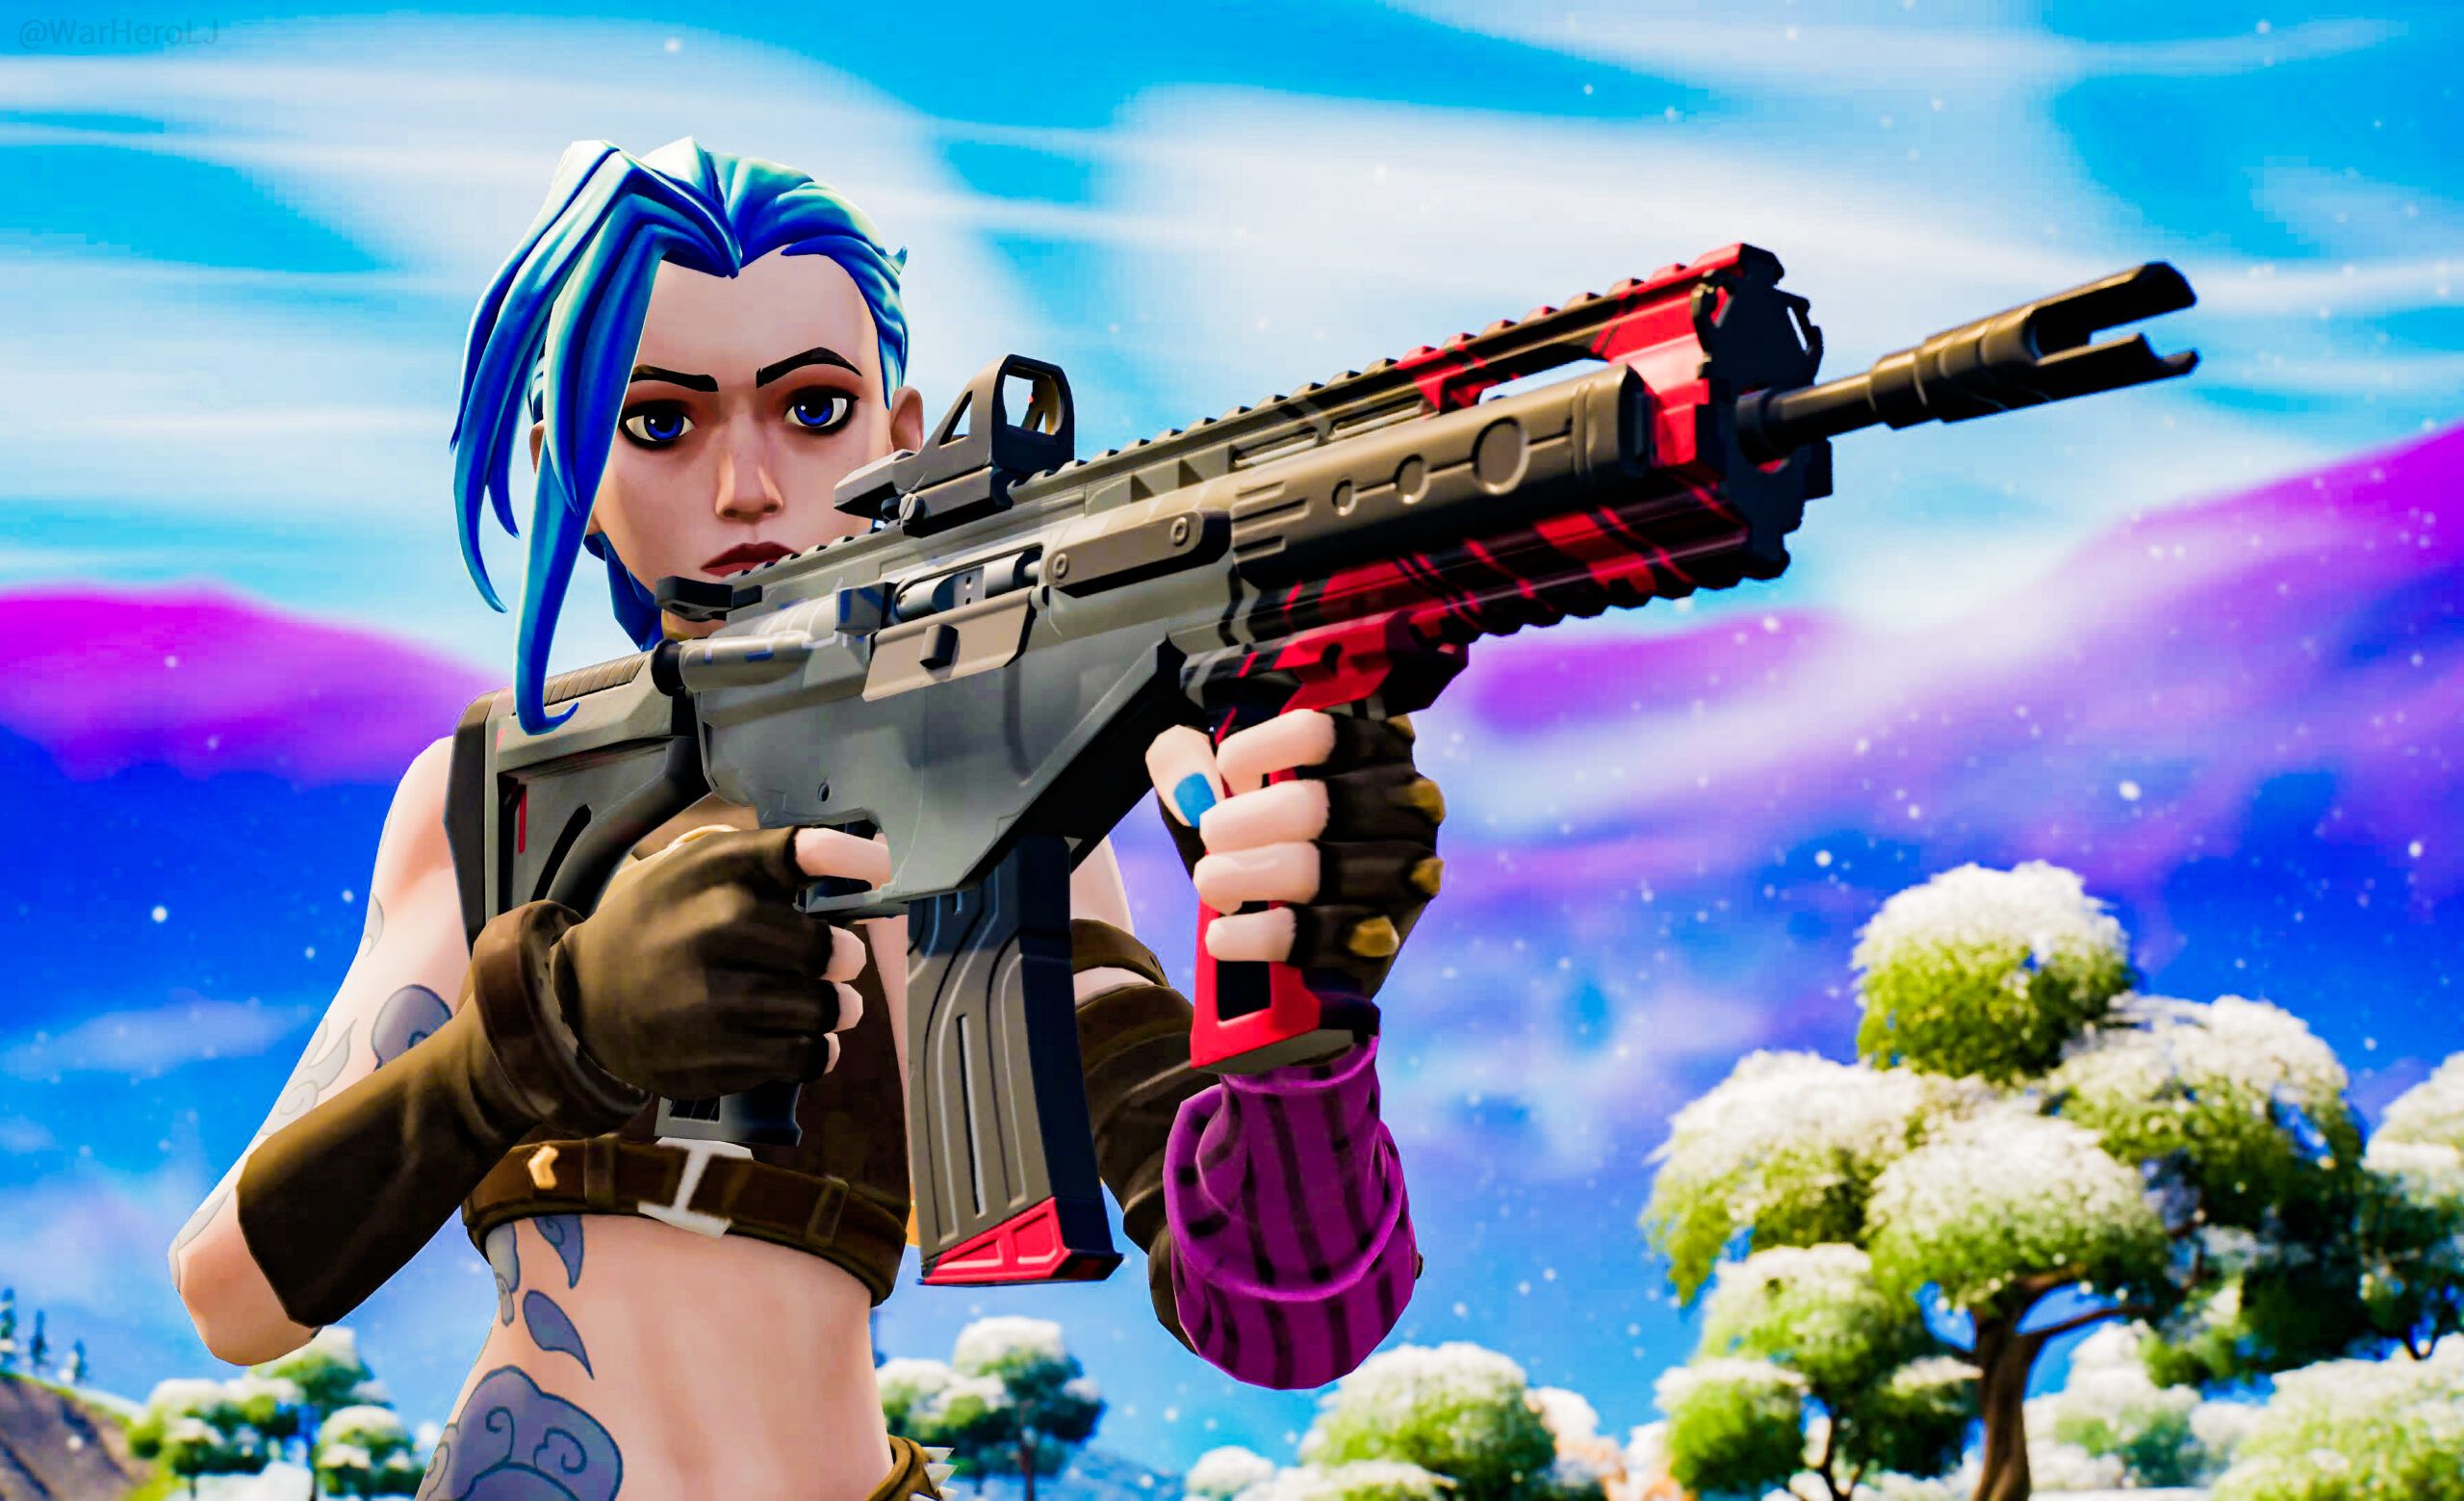 Is Jinx Skin Removed From Fortnite Item Shop?